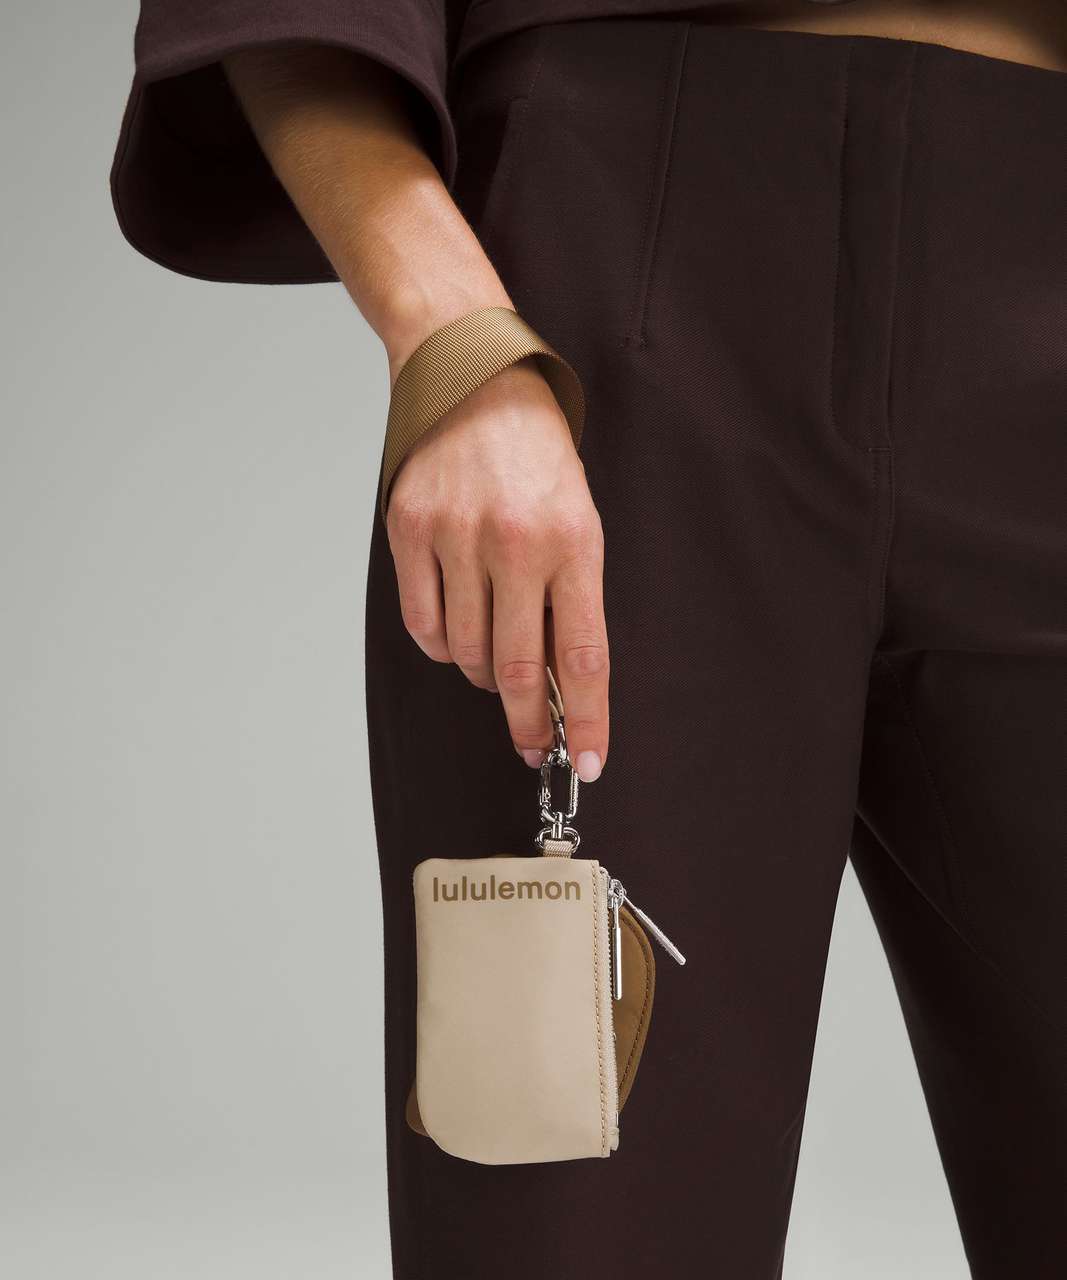 Lululemon Dual Pouch Wristlet - Allspice / Trench